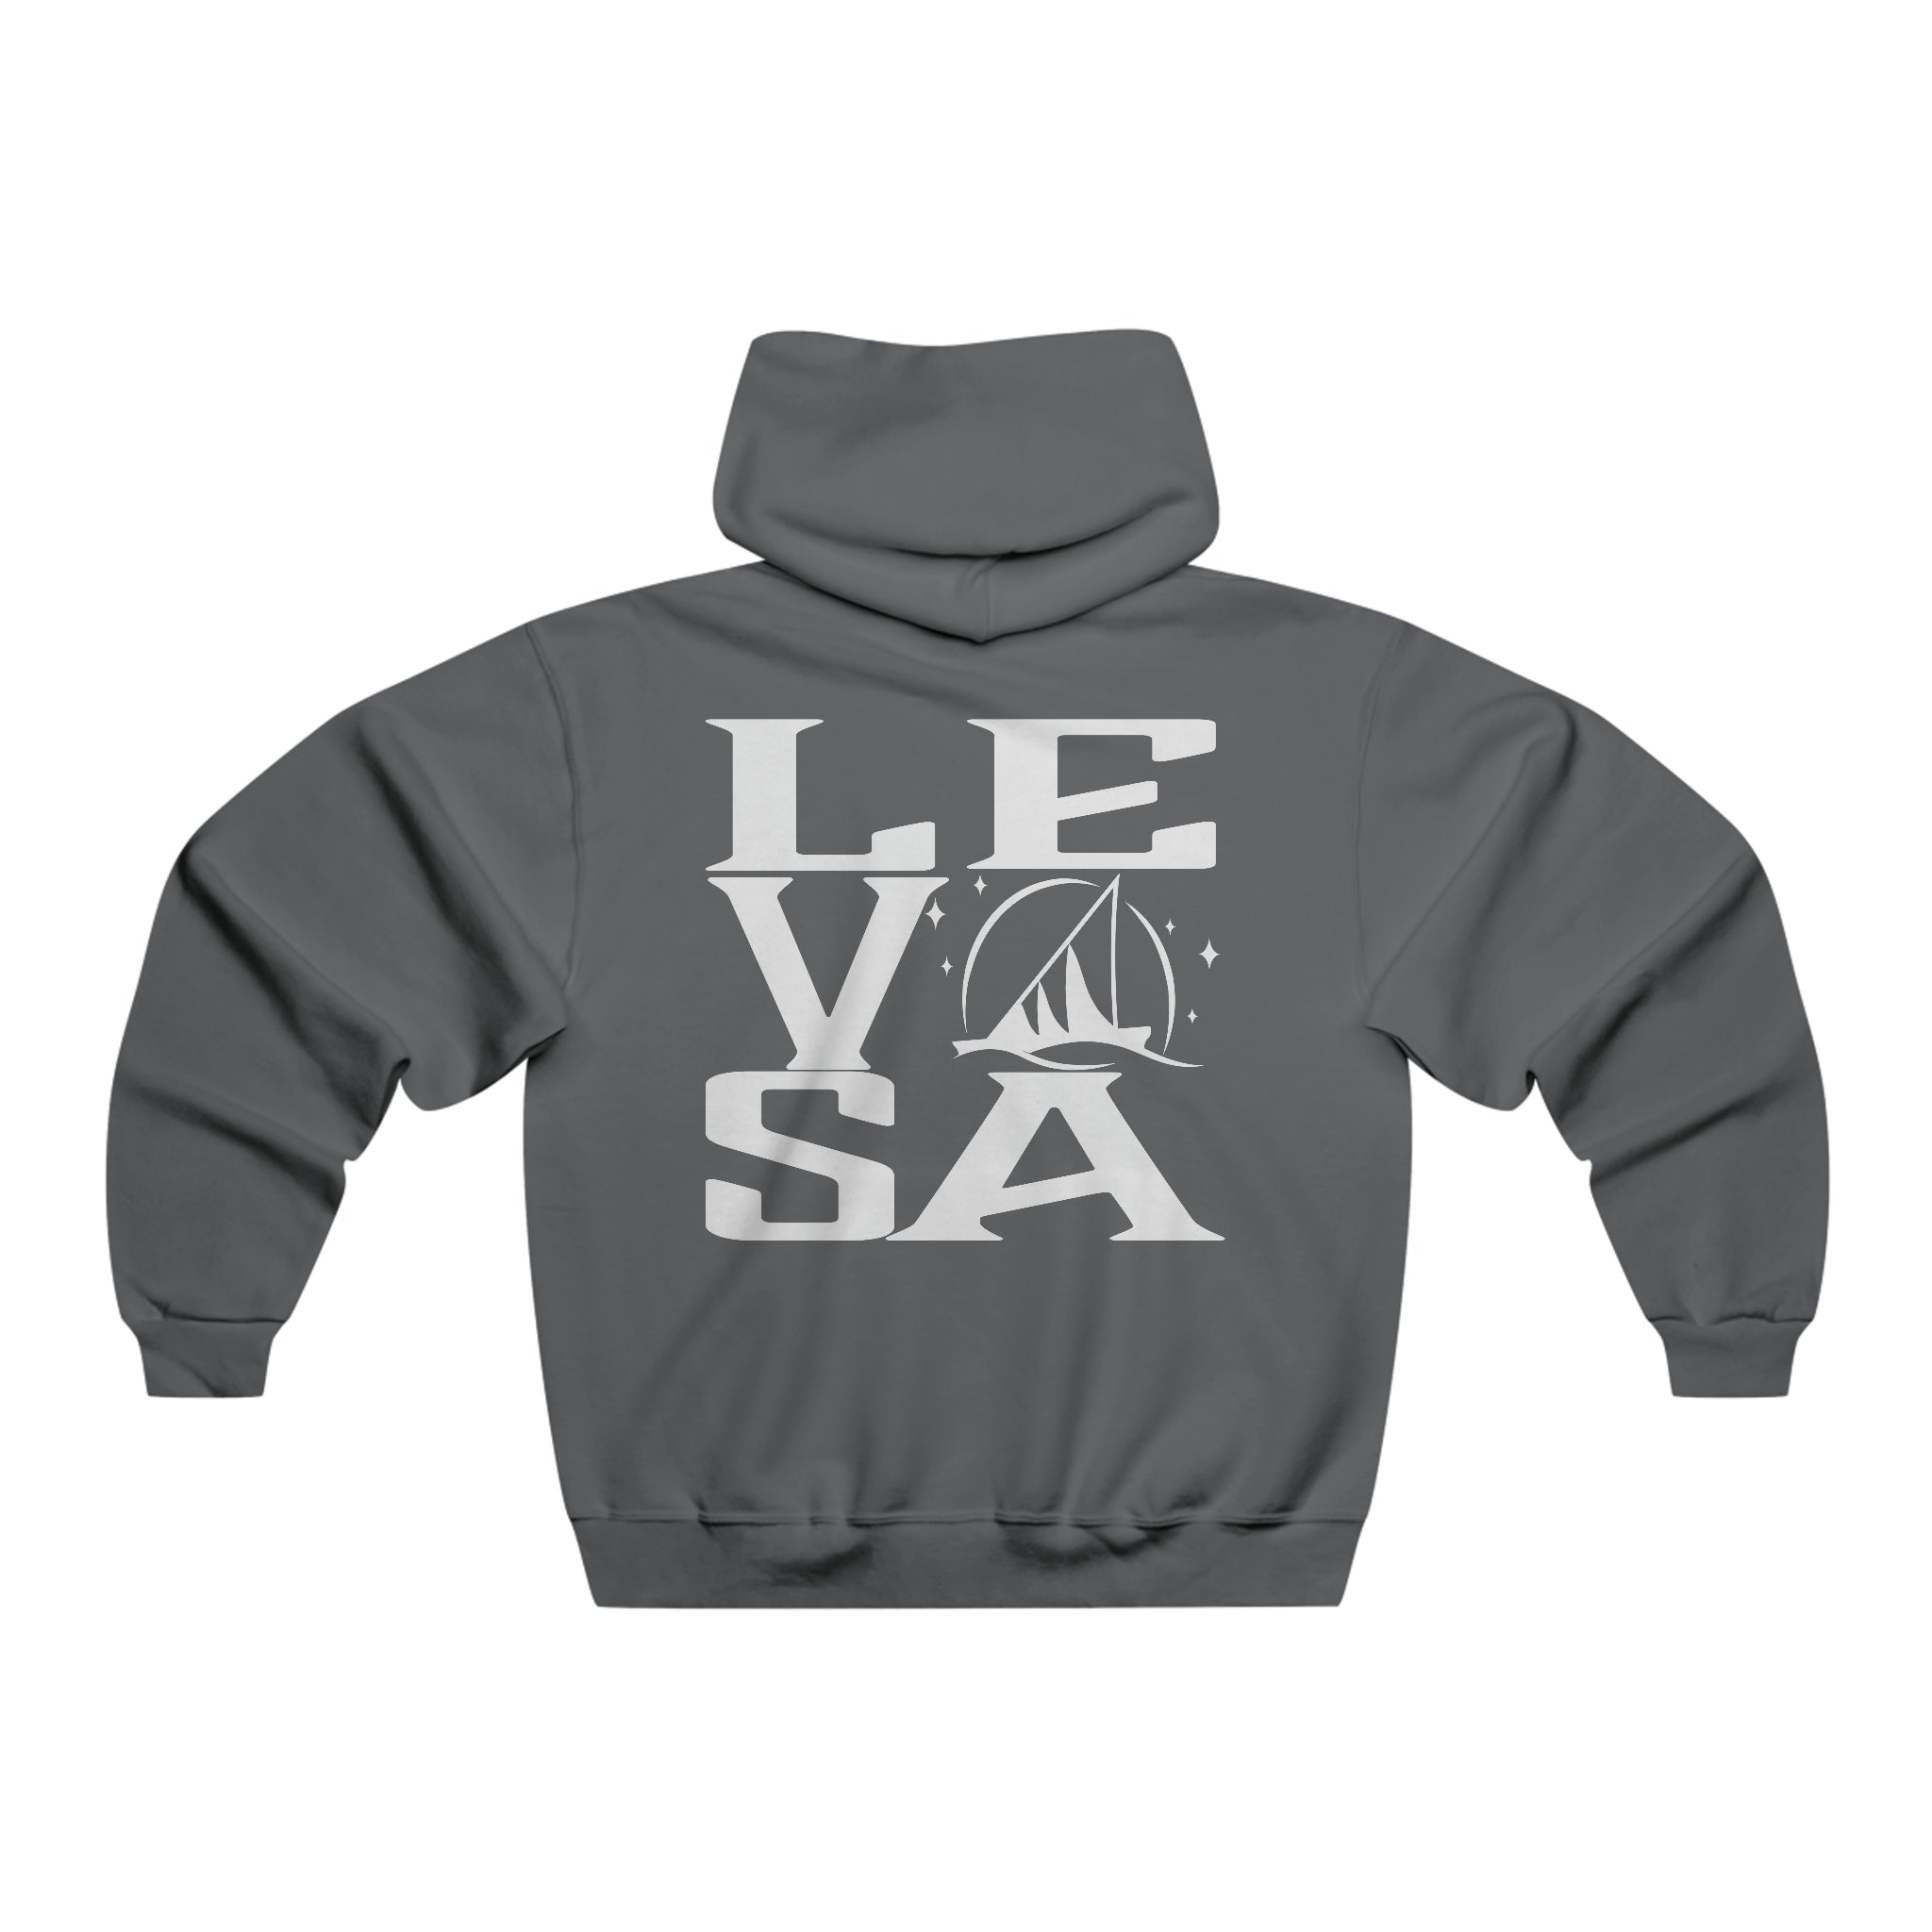 South Pacific Wave Classic Hoodie